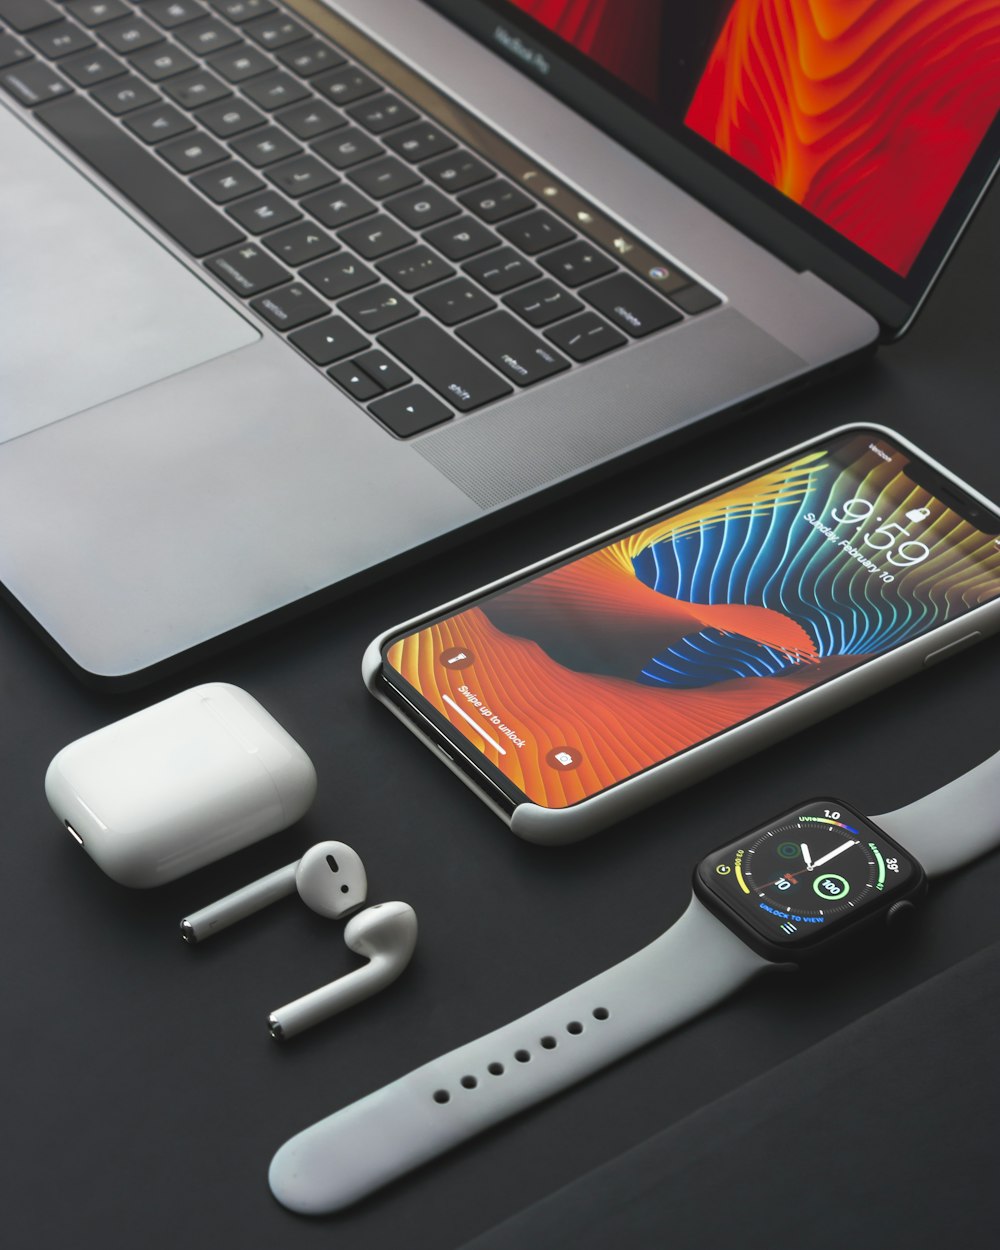 Space gray iphone x turned on beside apple airpods and charging case photo  – Free Cell phone Image on Unsplash